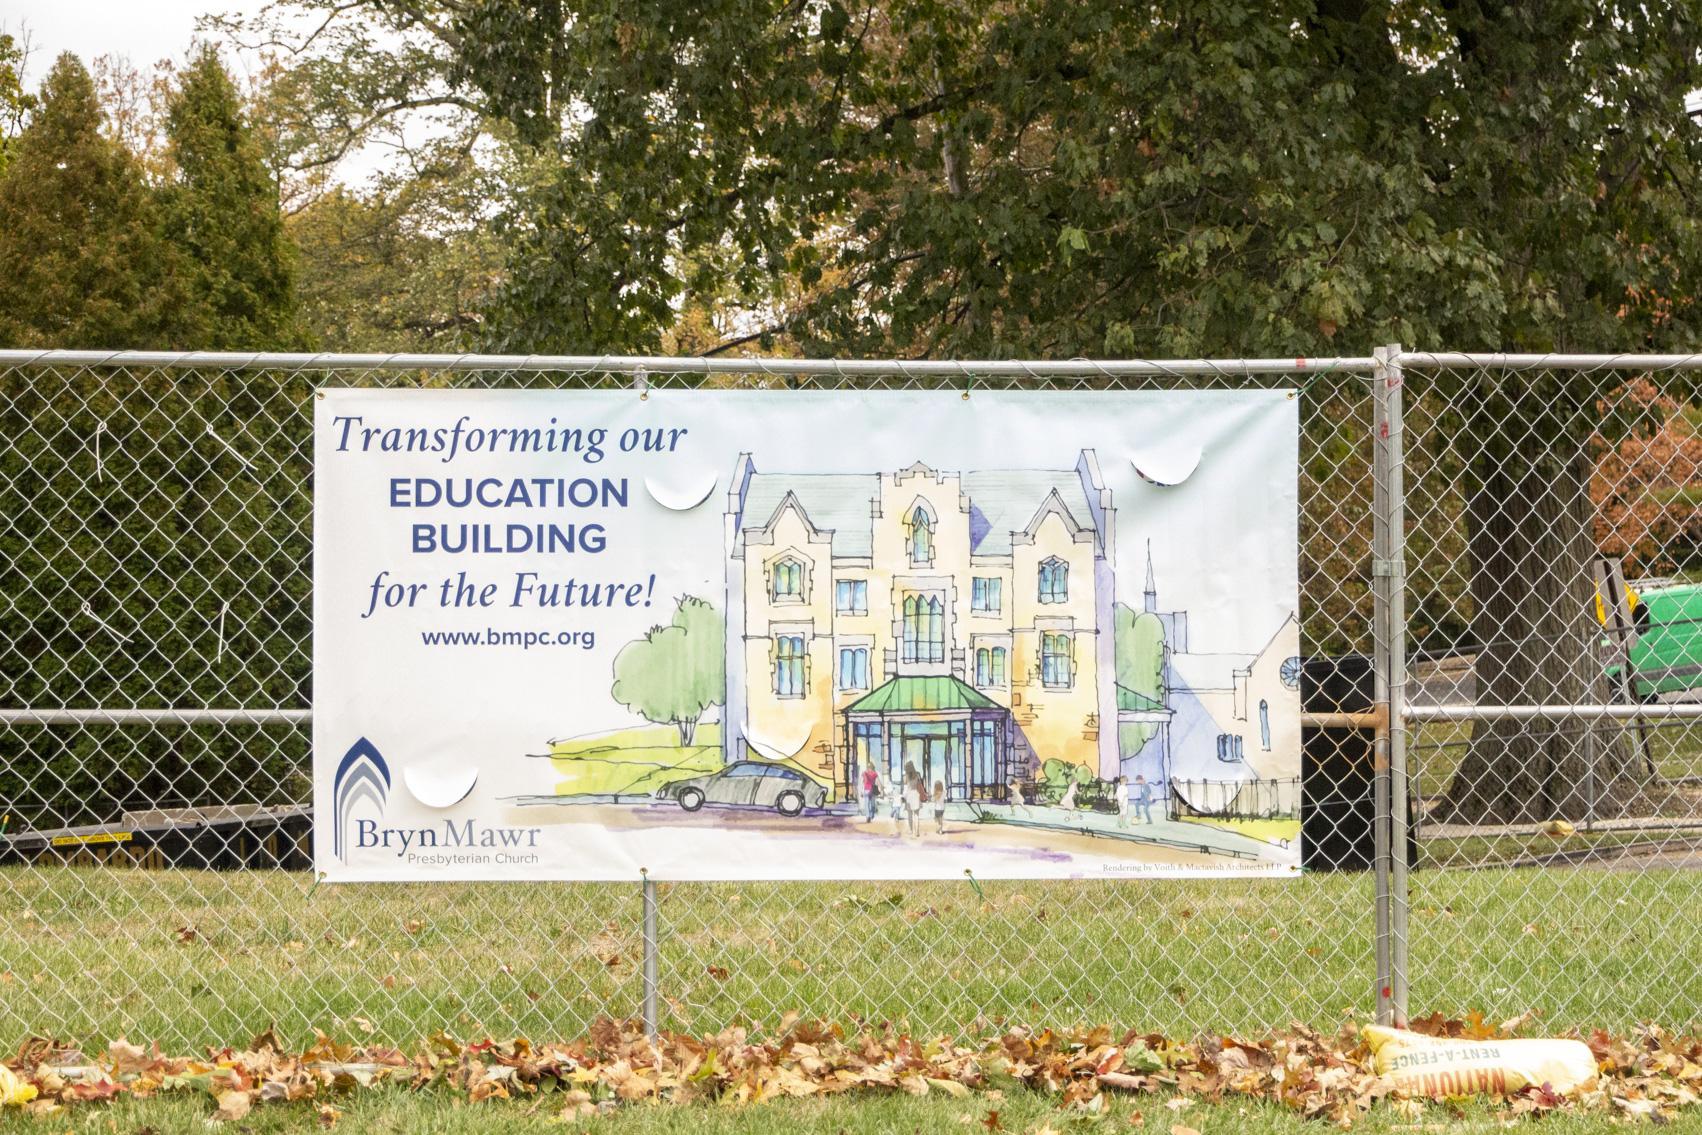 Transforming our Education Building for the Future! Sign